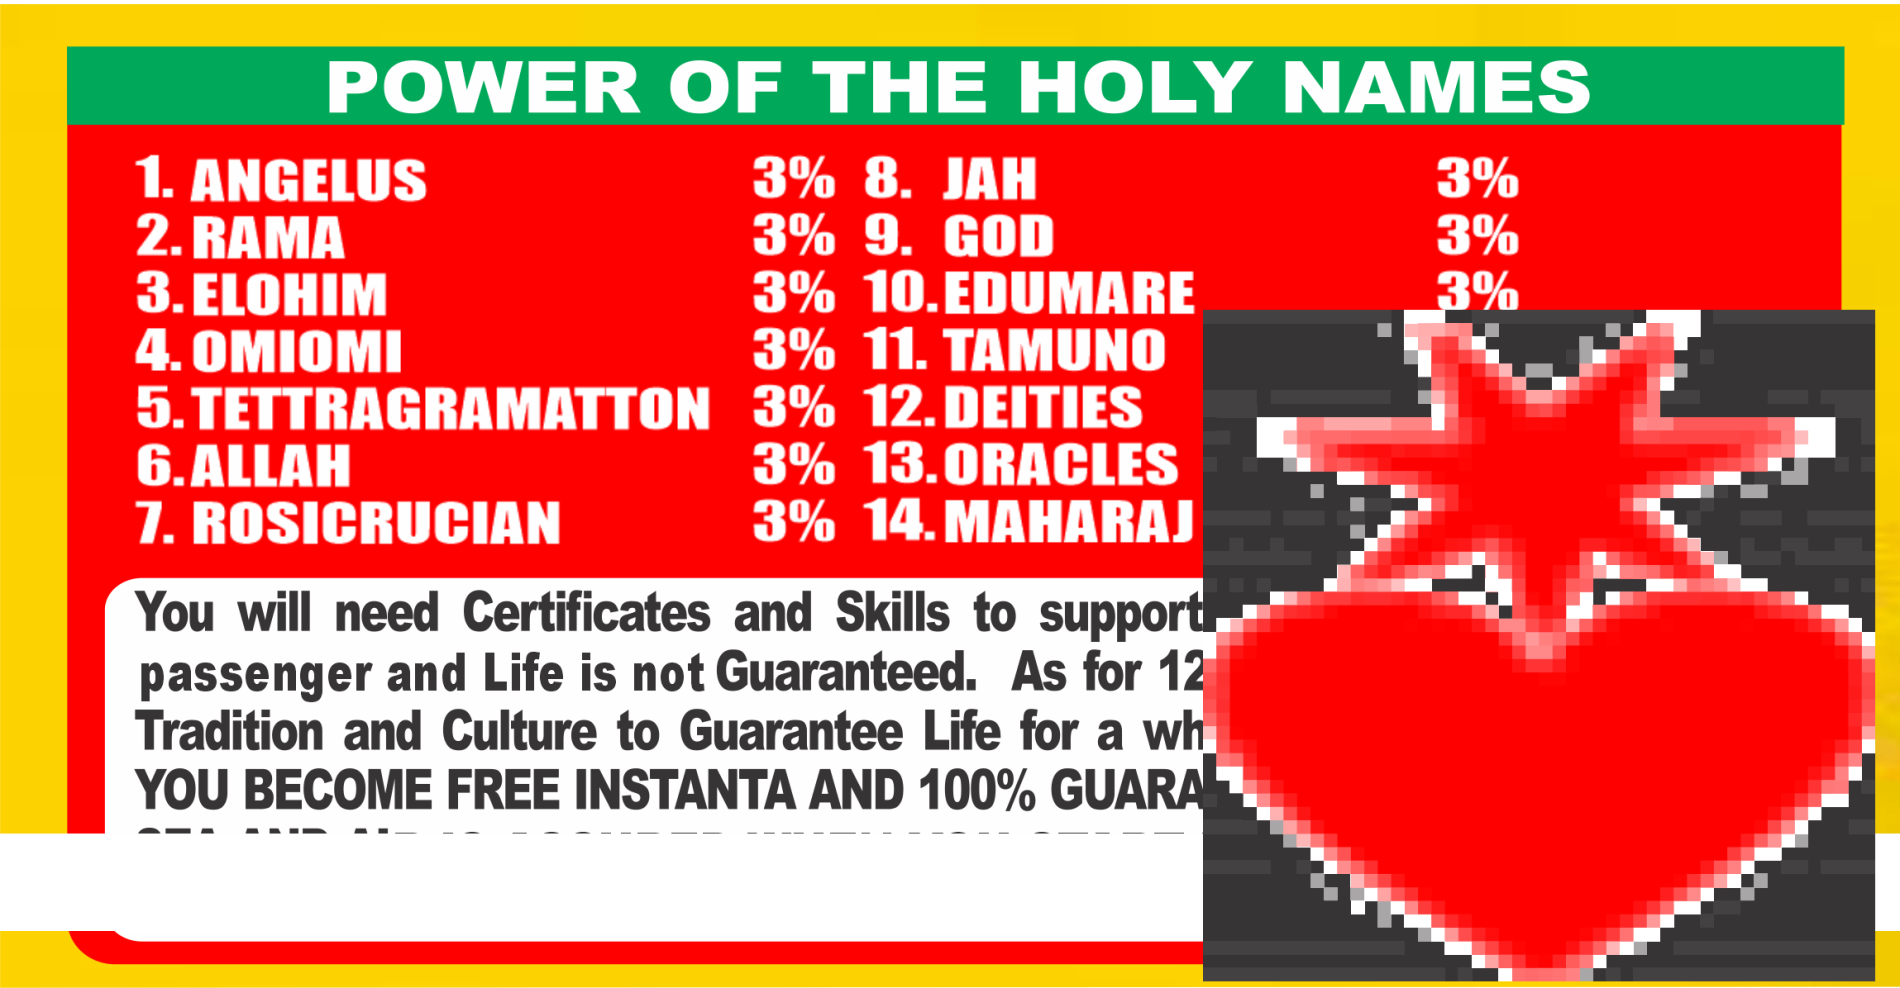 POWER OF THE HOLY NAME